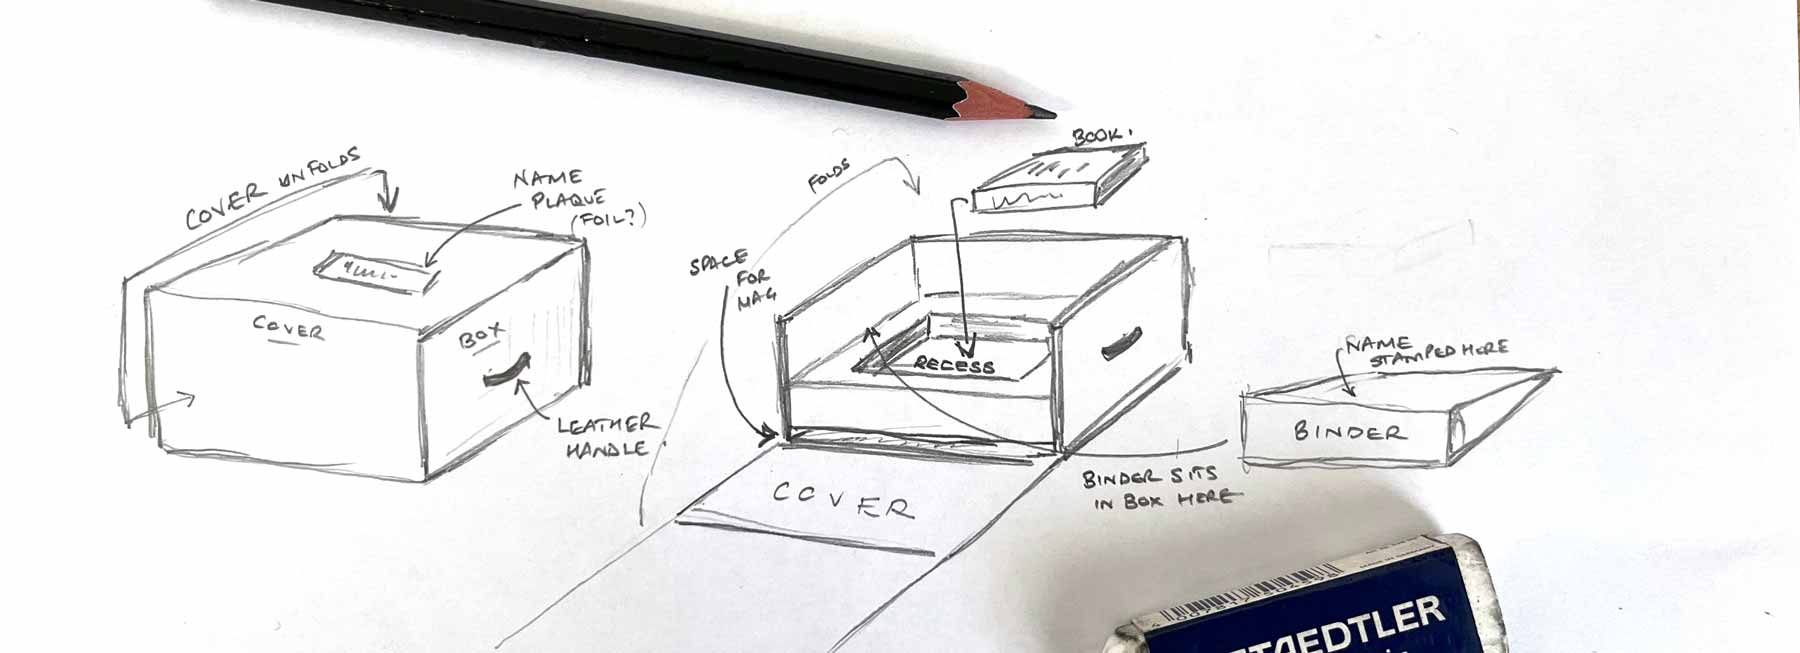 a sketch of an idea for making a bespoke and custom presentation box and binder